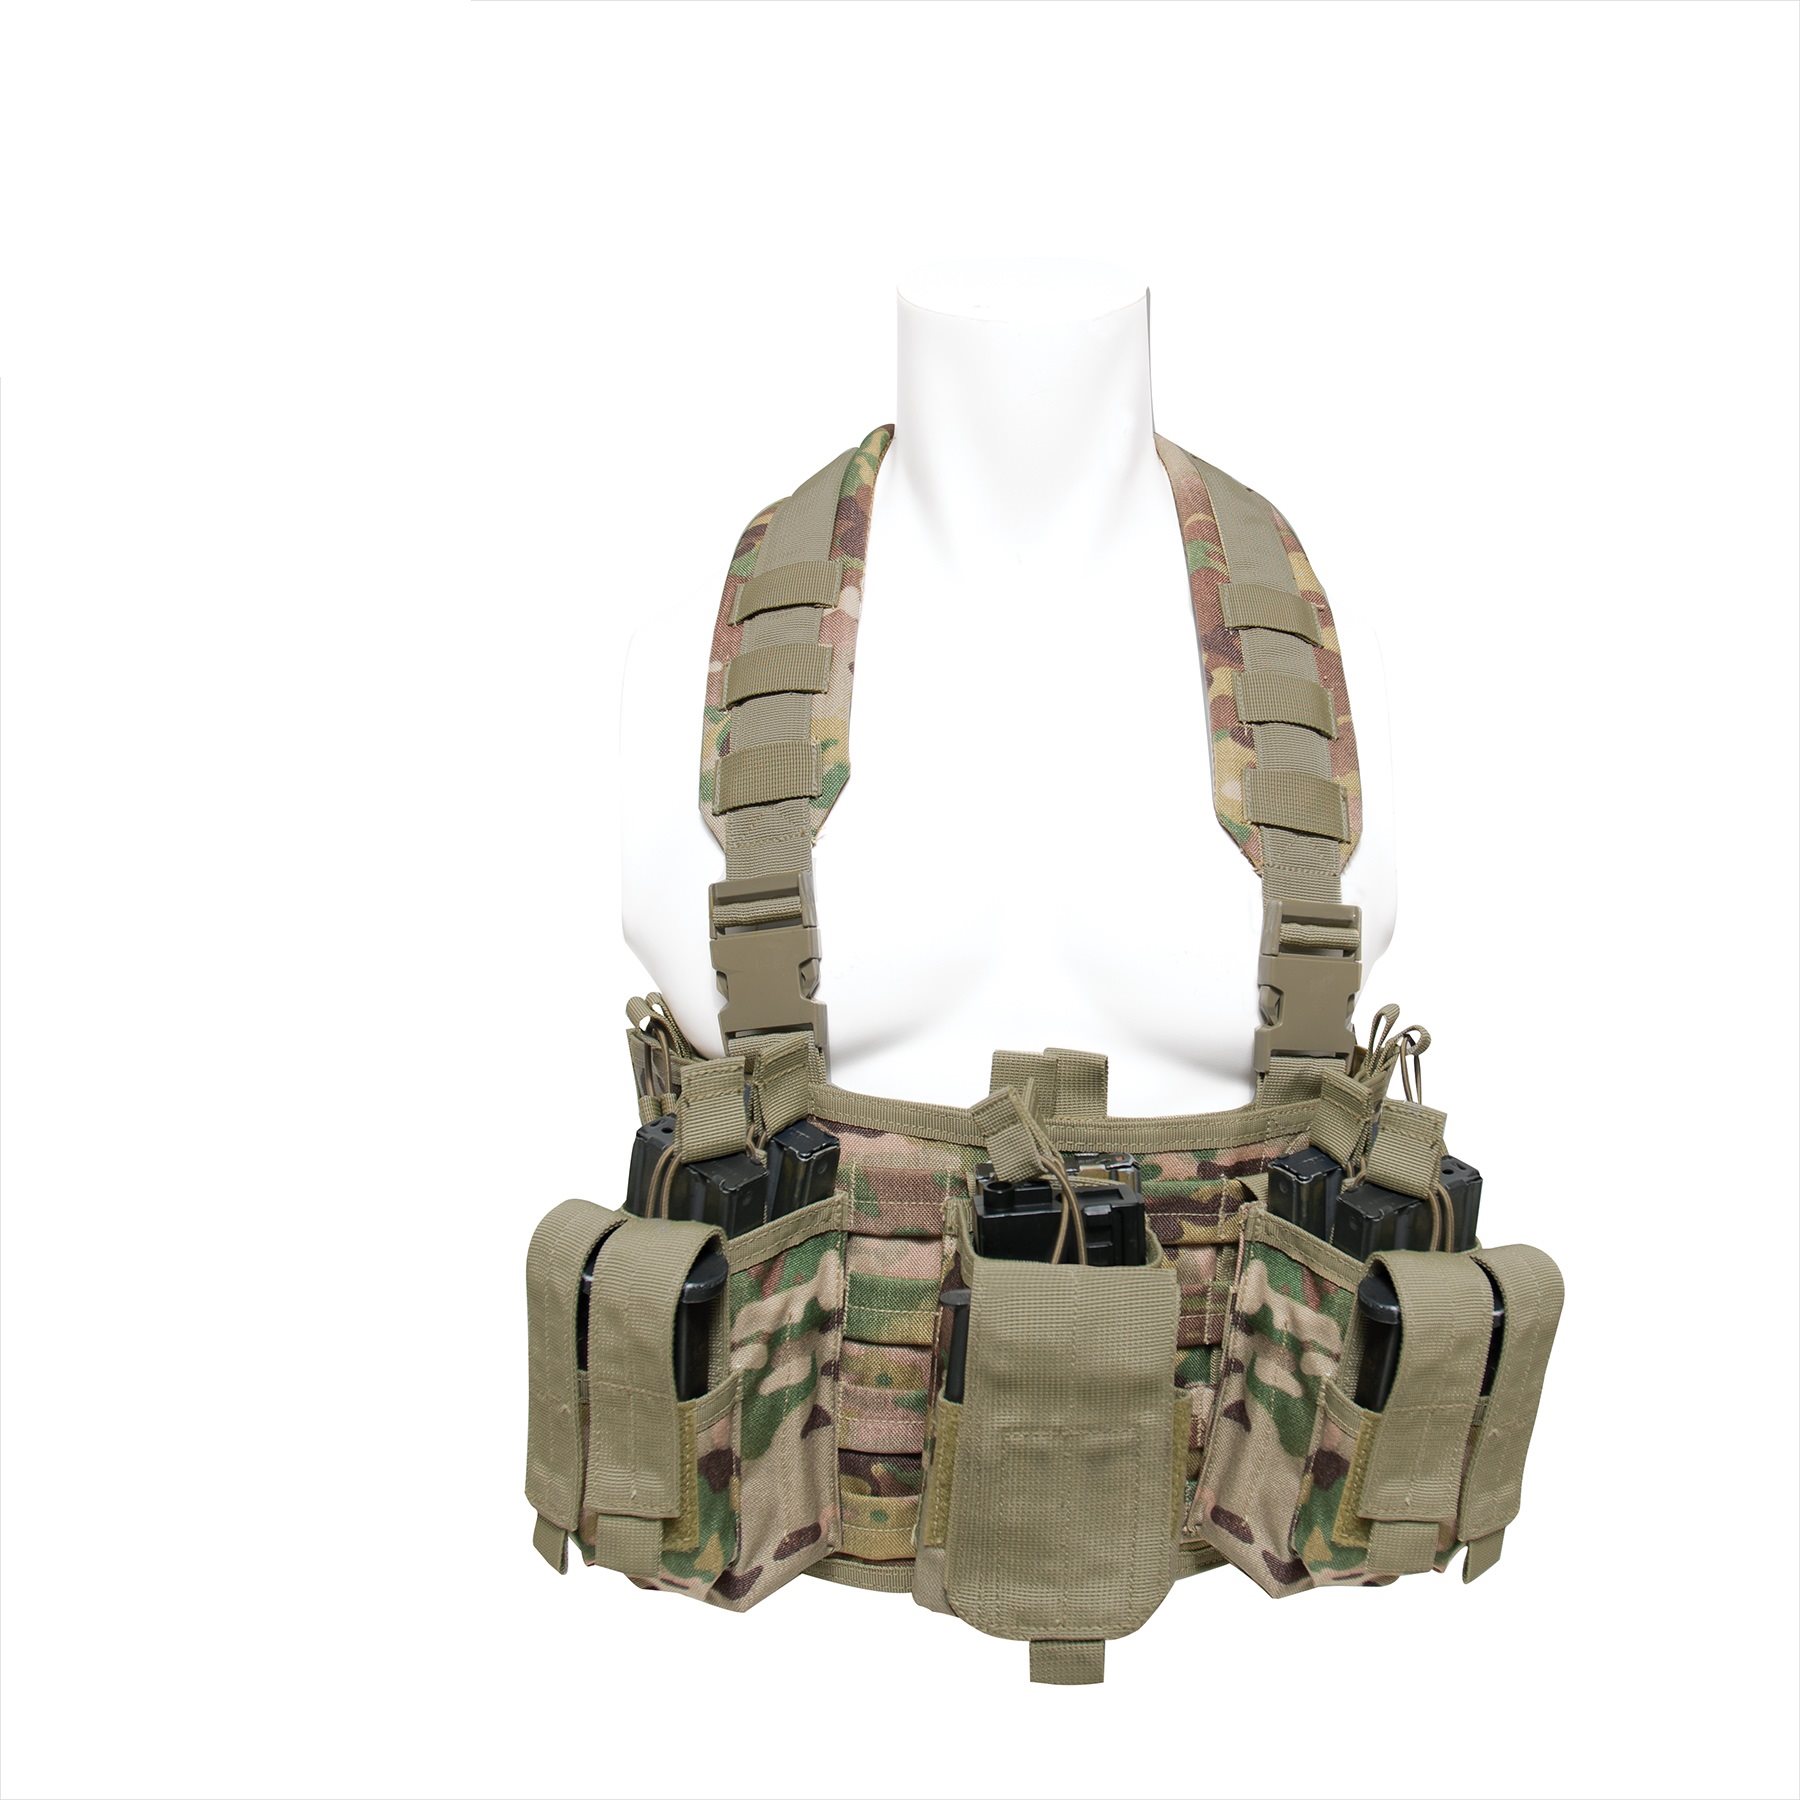 Tactical Chest Rig Cheapest Selection, Save 45% | jlcatj.gob.mx